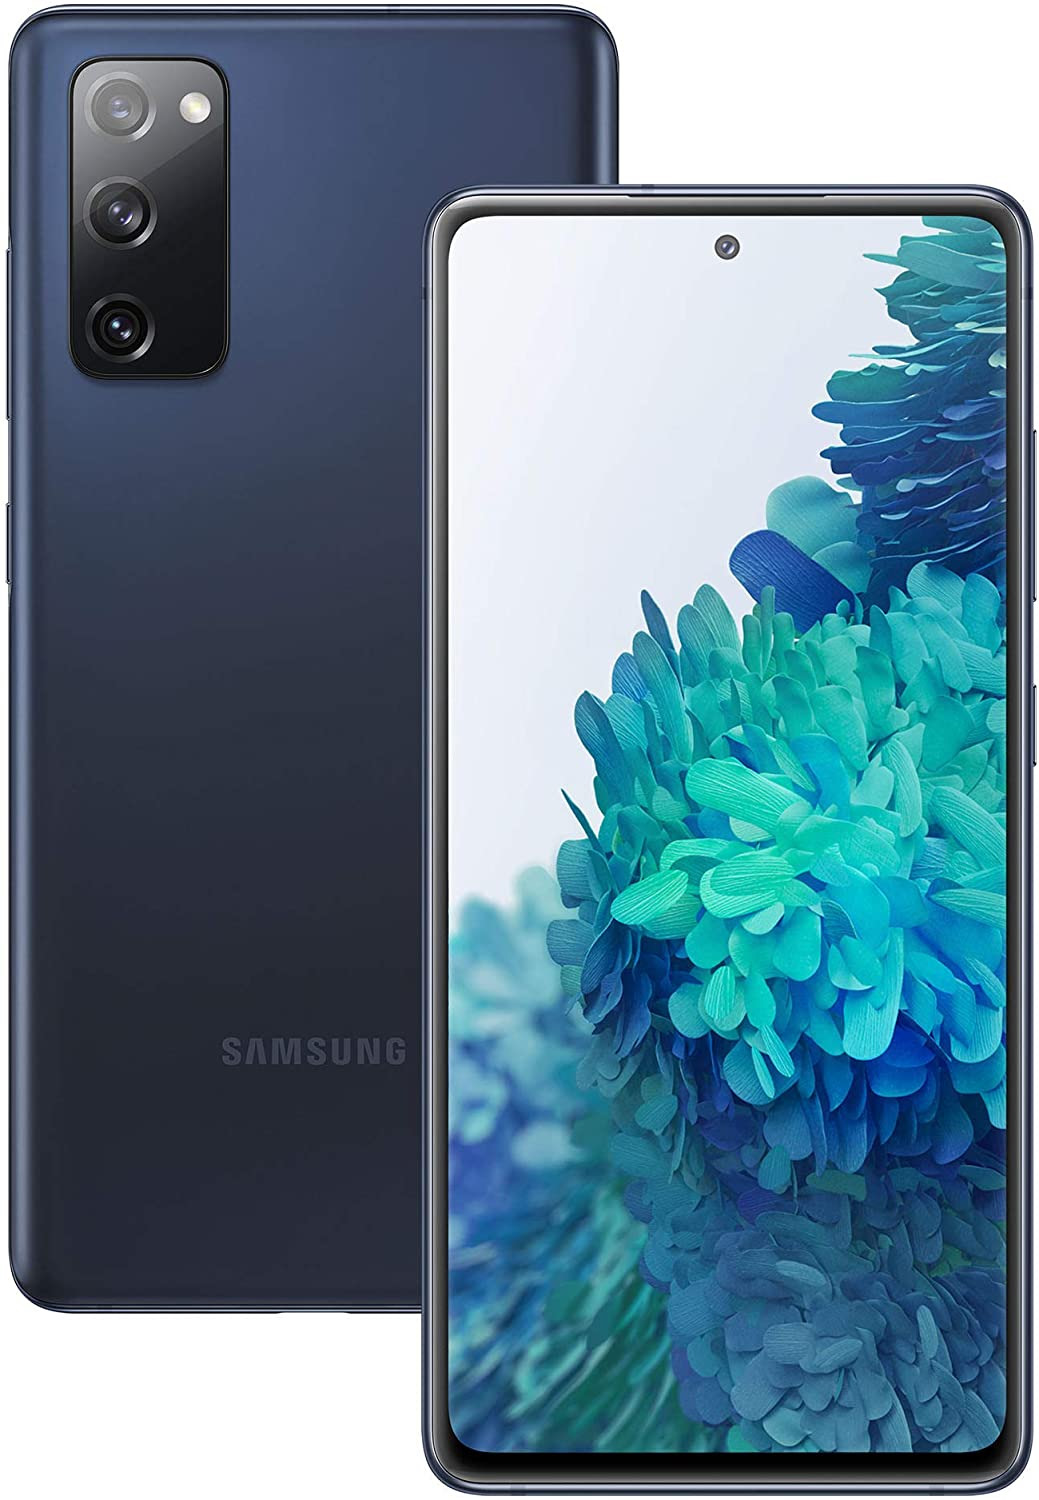 S20 FE 5G for $549 in the US